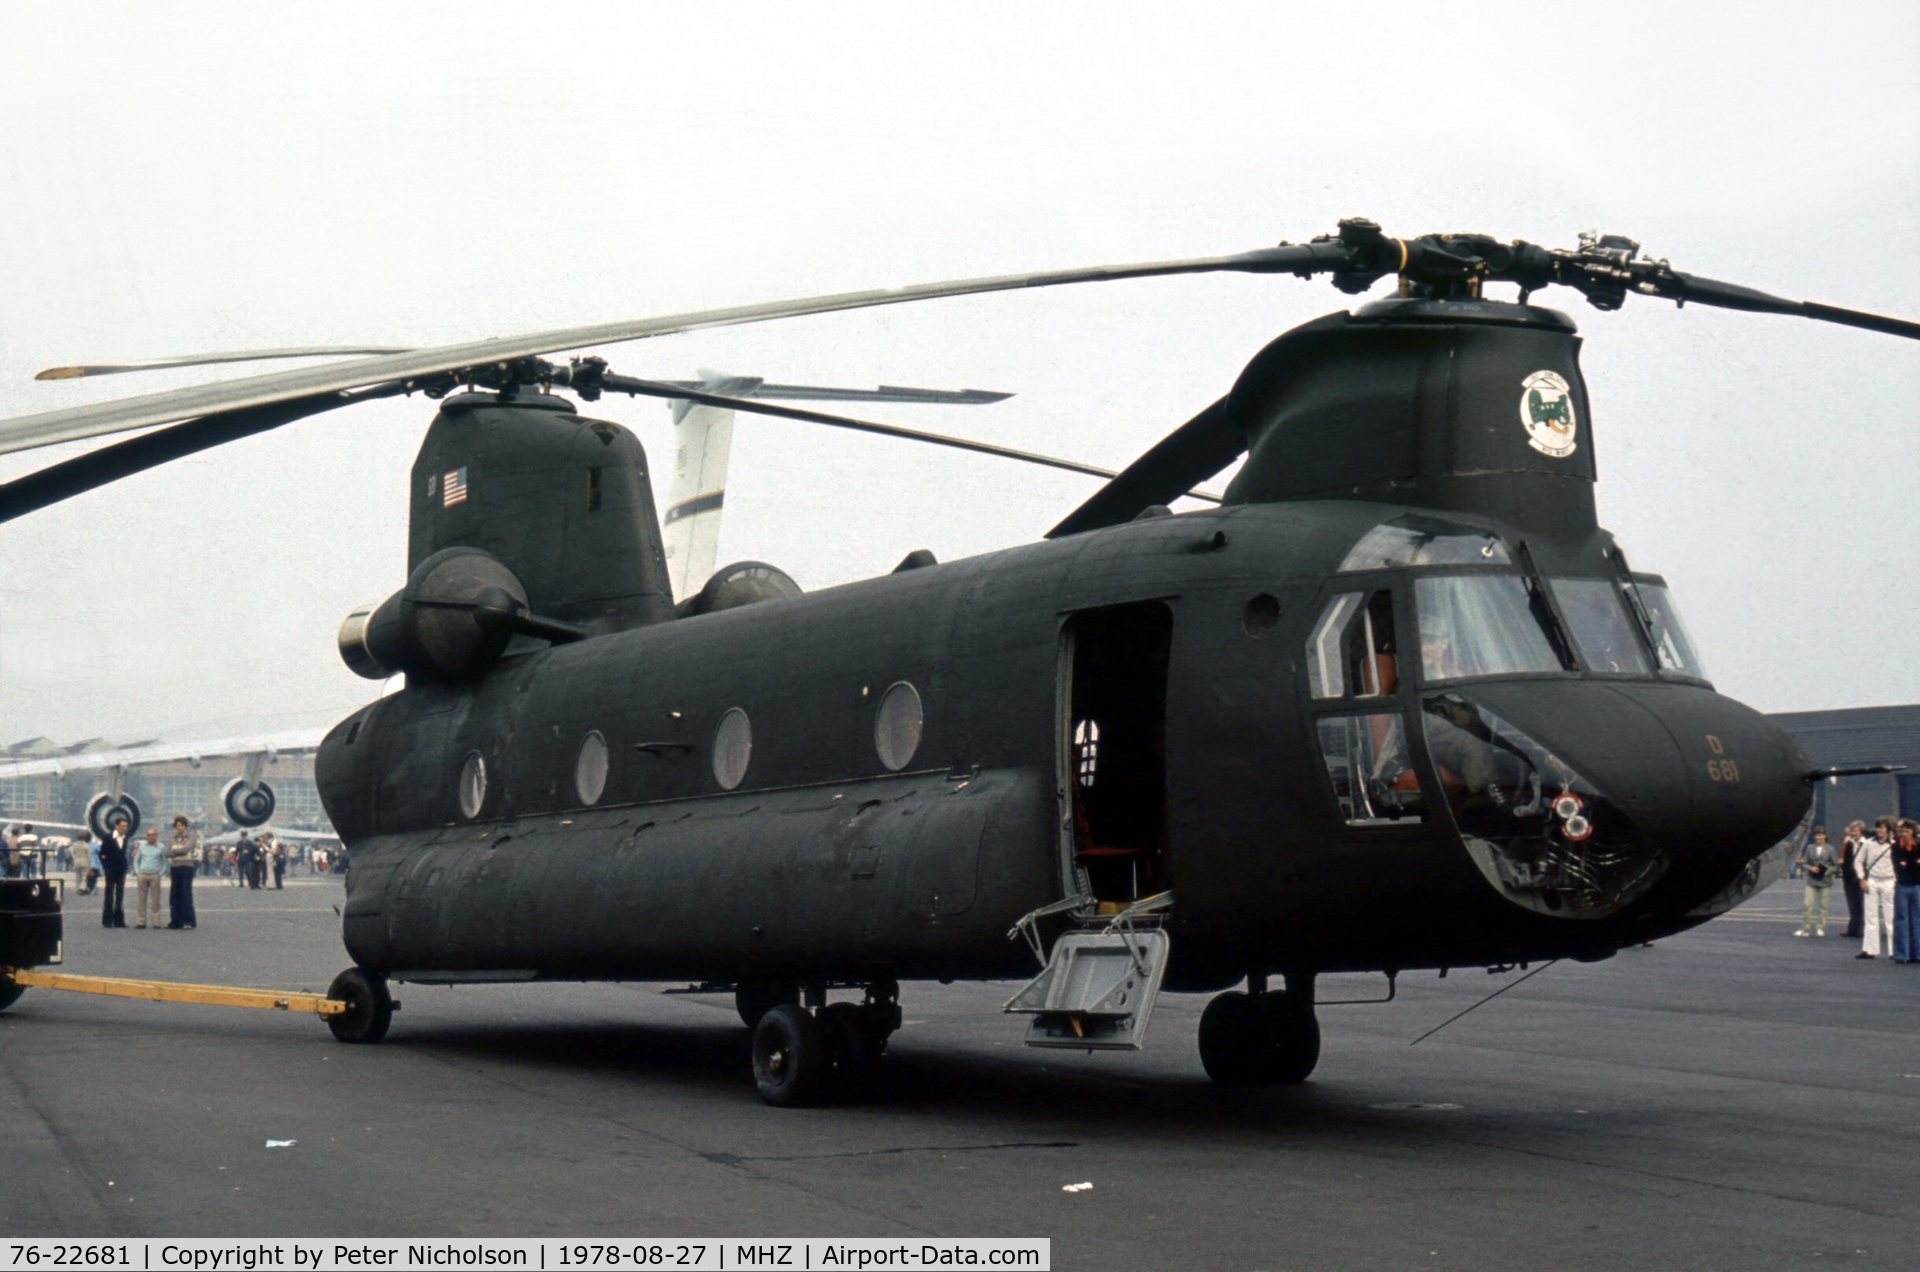 76-22681, 1976 Boeing Vertol CH-47C Chinook C/N B.722, CH-47C Chinook of the US Army's 180th Aviation Company on display at the 1978 Mildenhall Air Fete.